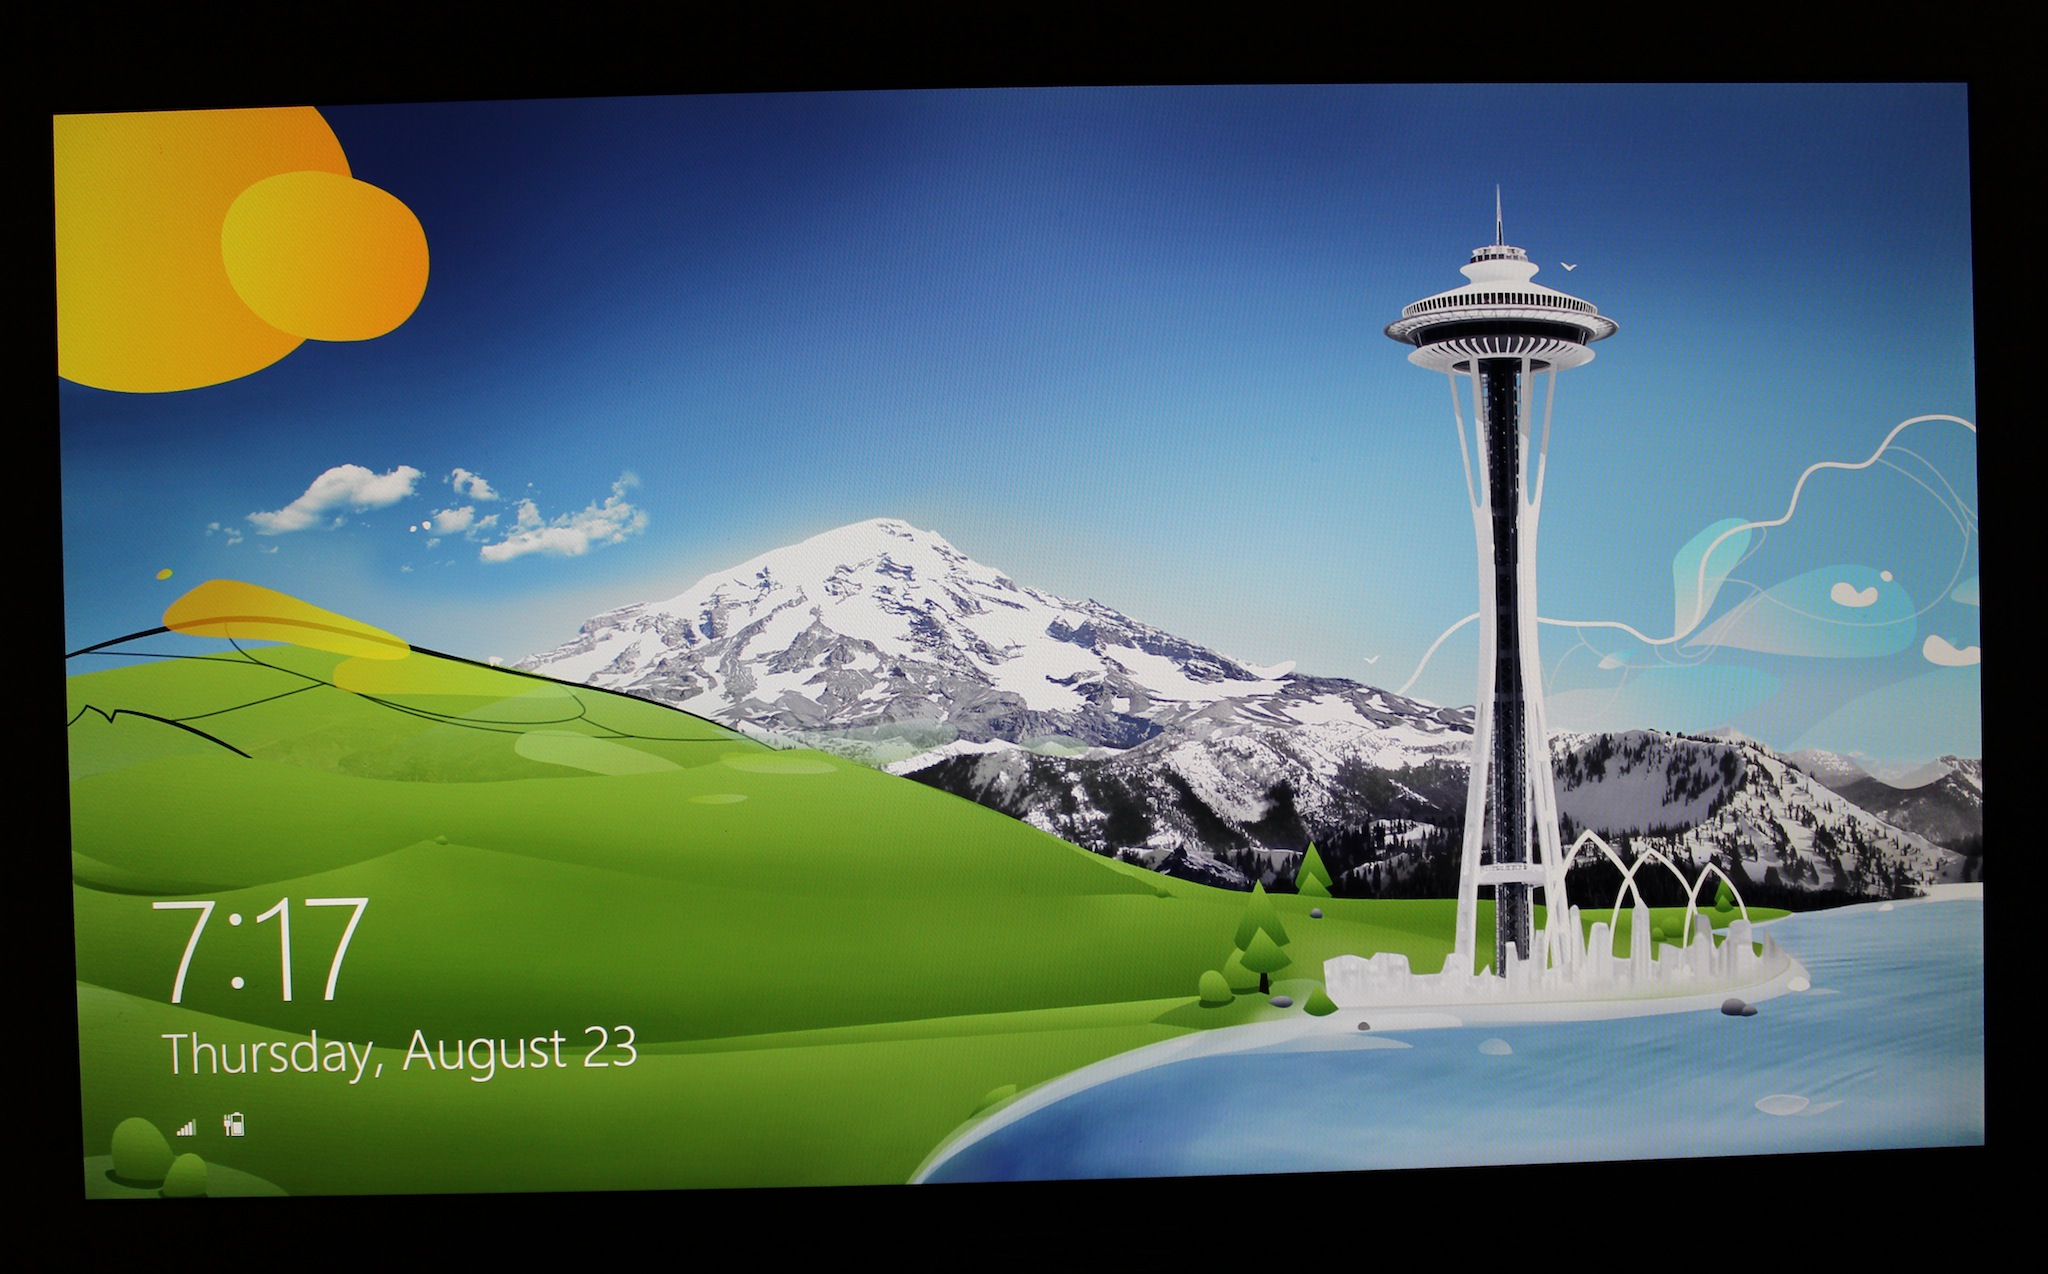  on using one of the colorful login screen wallpapers from Windows 8 2048x1274